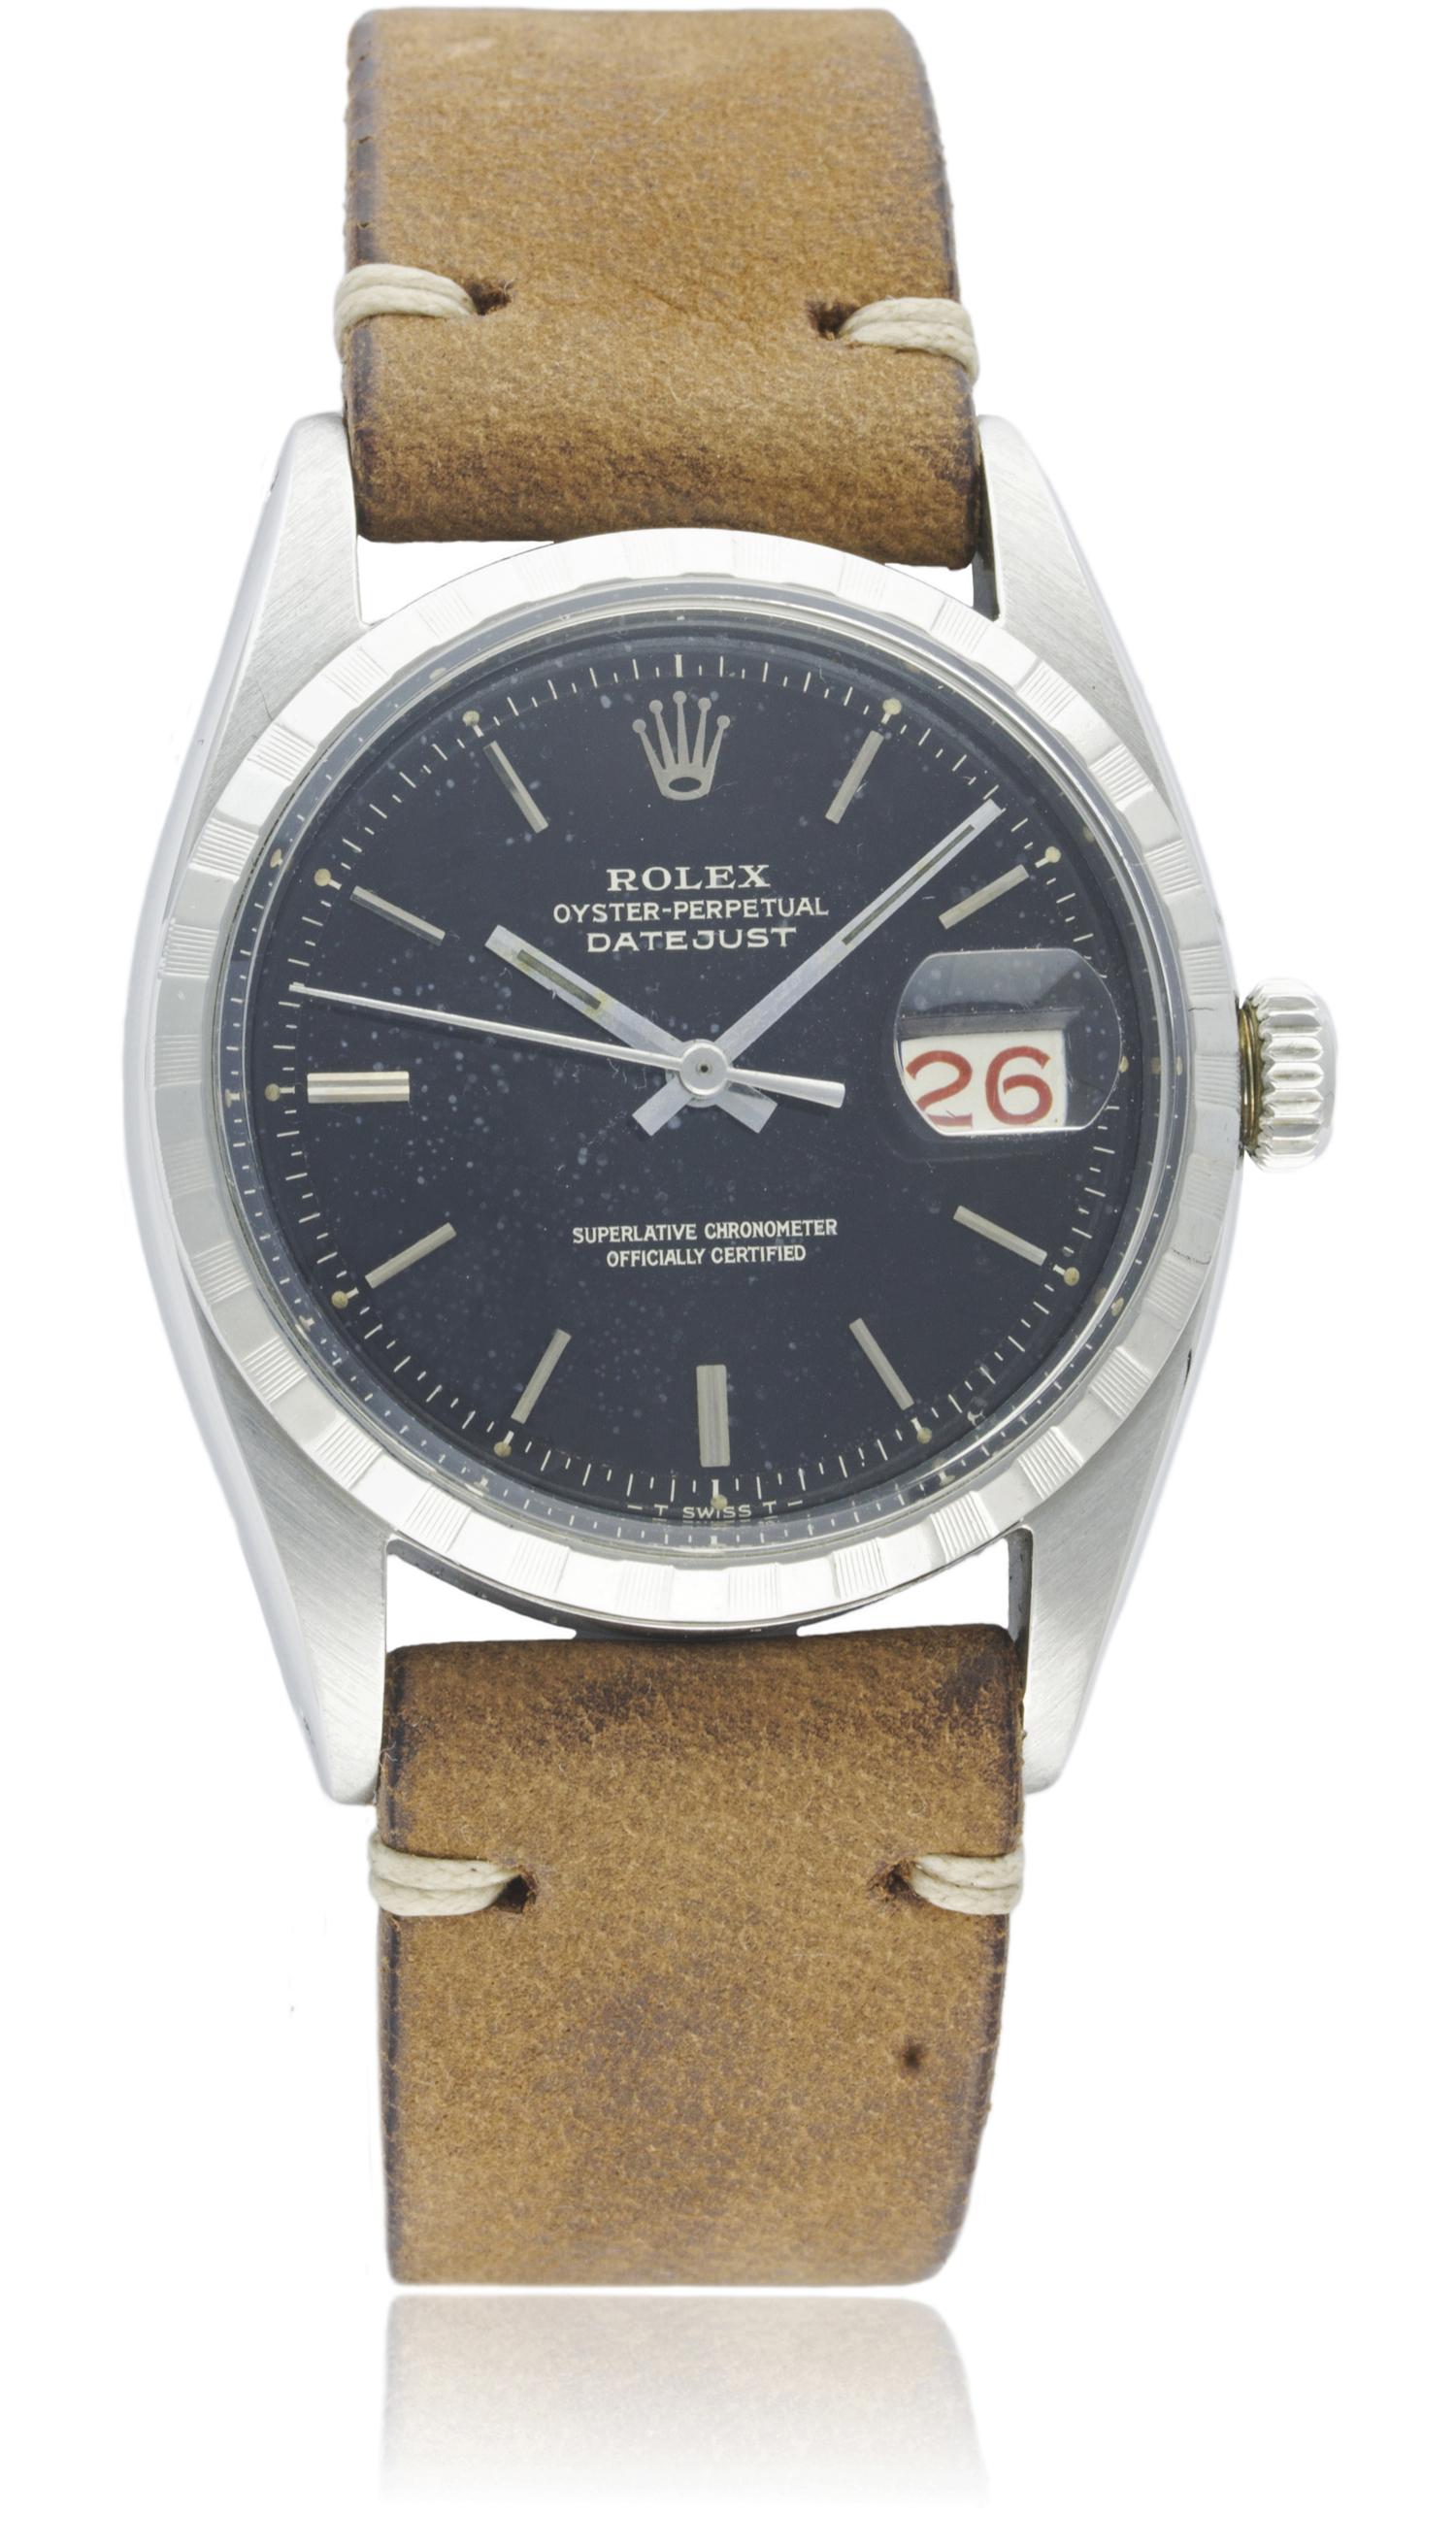 A RARE GENTLEMAN'S STAINLESS STEEL ROLEX OYSTER PERPETUAL DATEJUST WRIST WATCH CIRCA 1960, REF. 6605 - Image 2 of 9